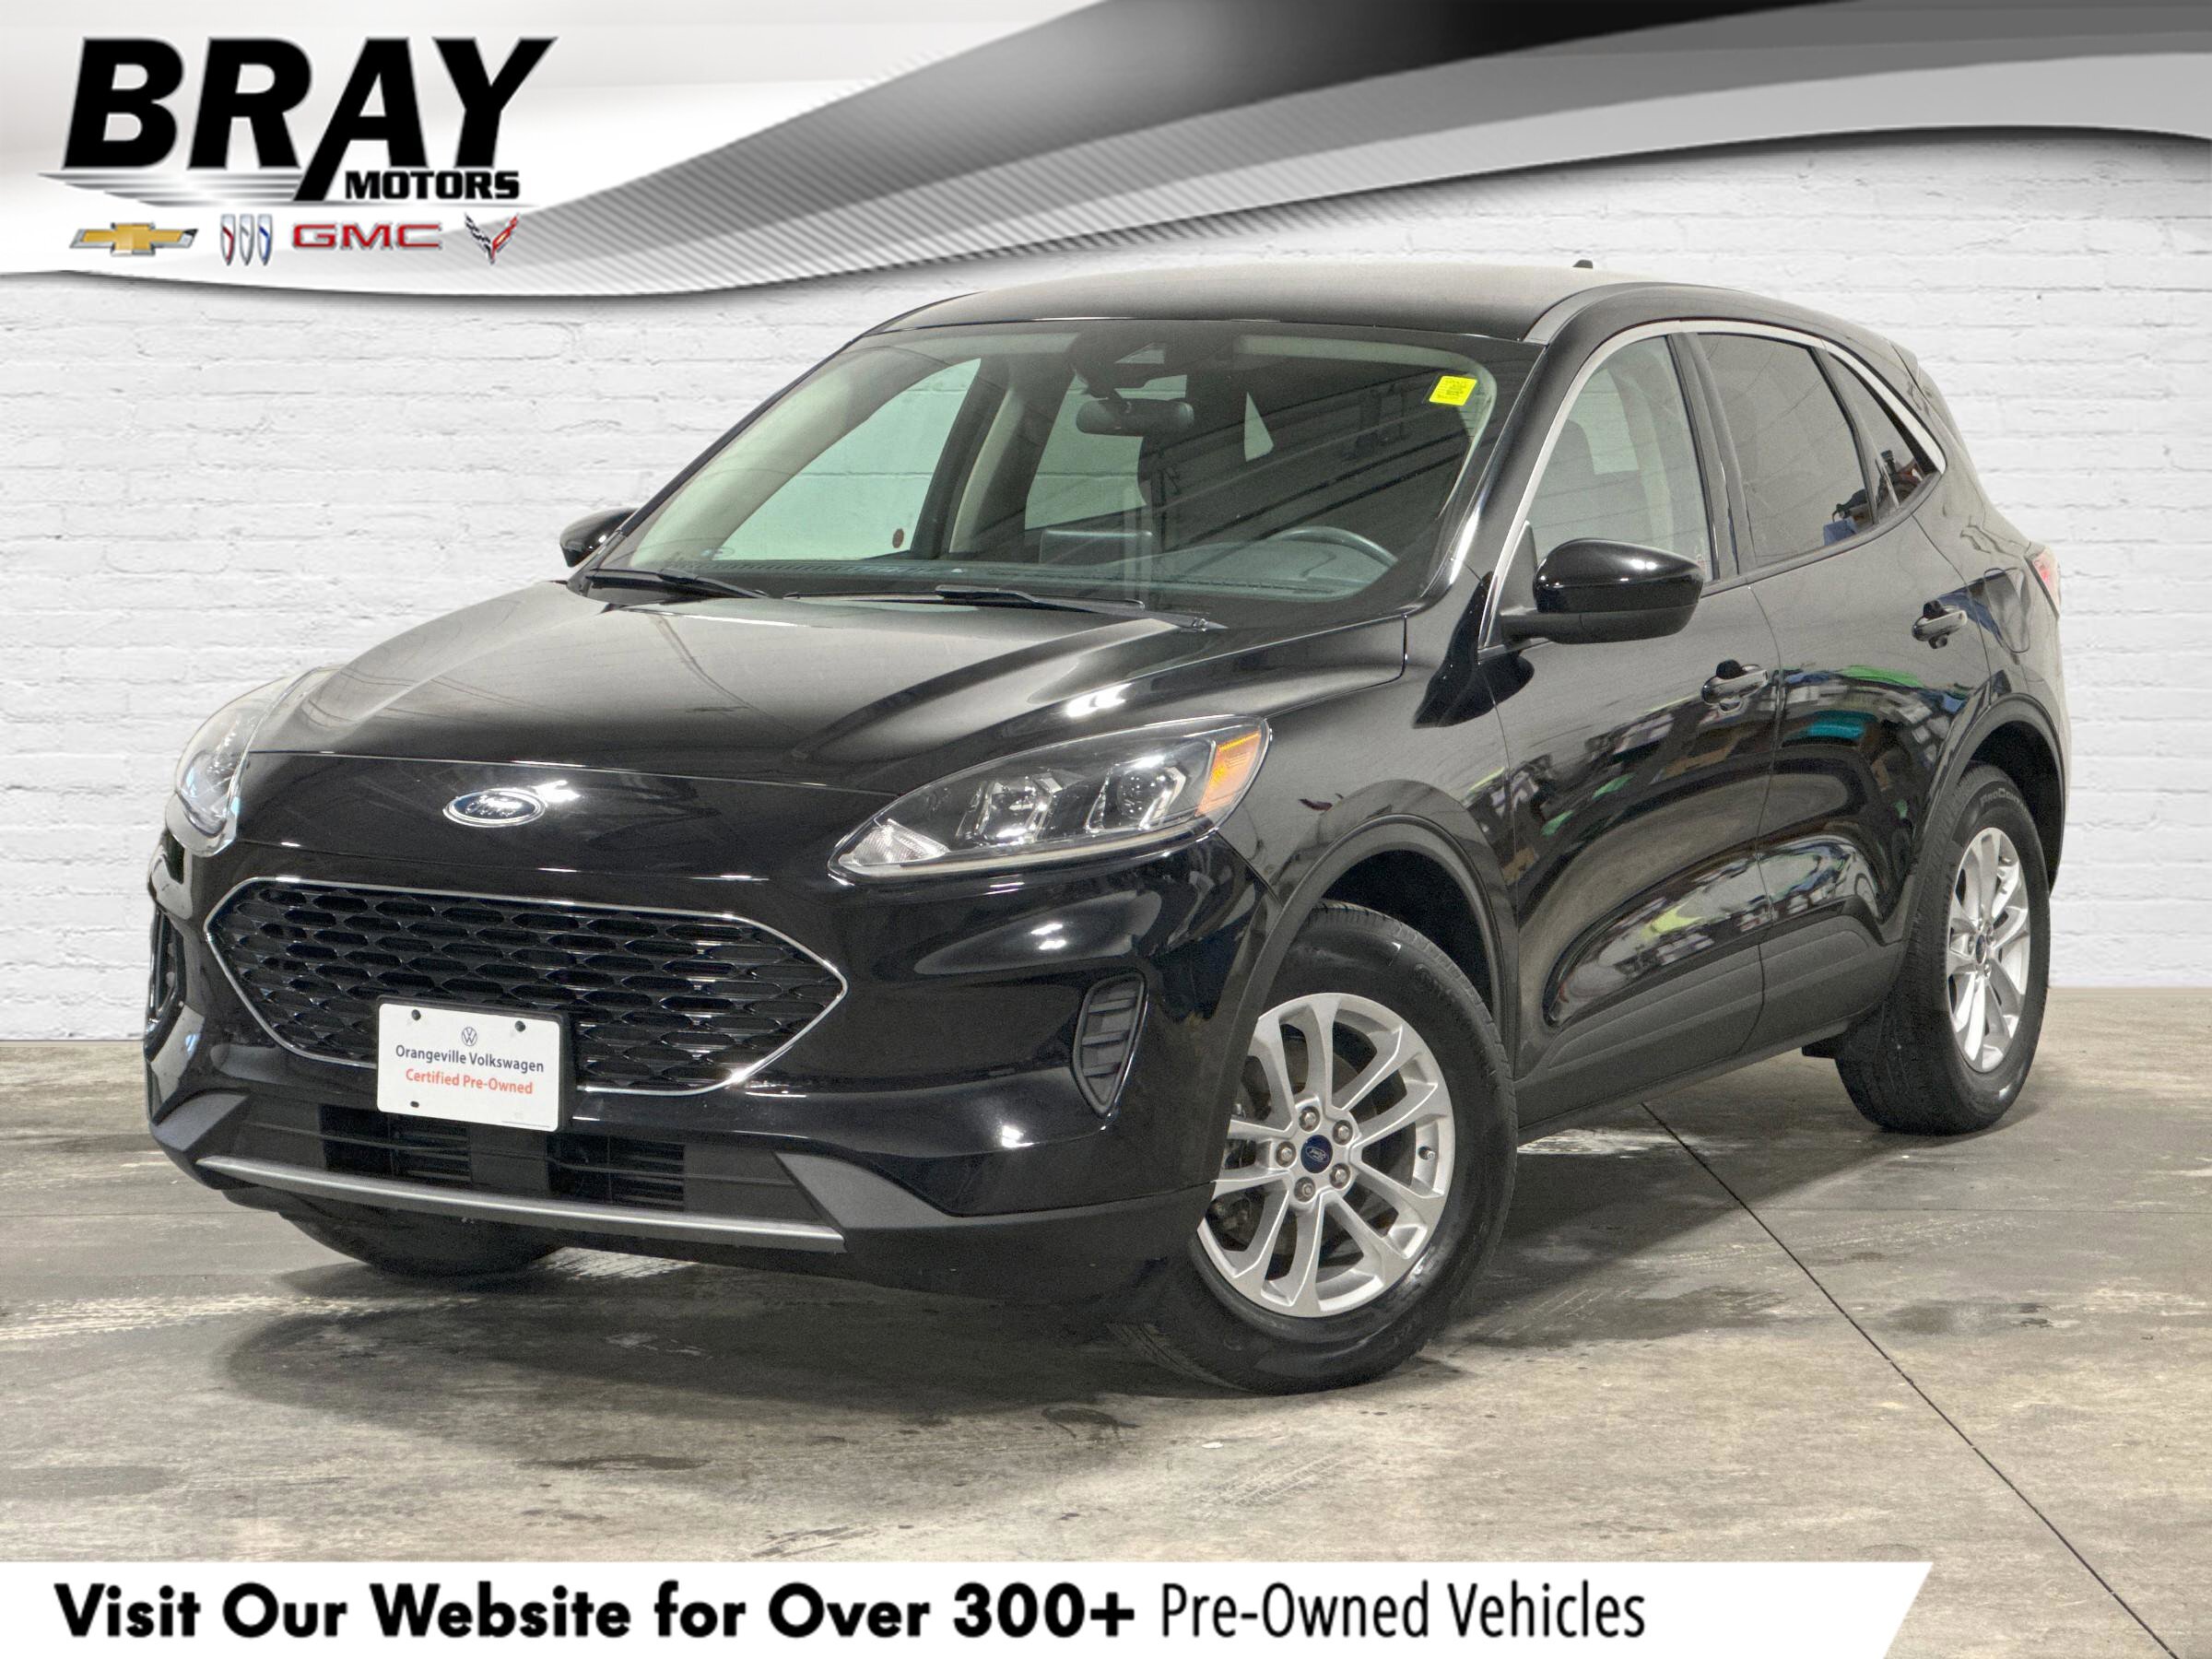 2020 Ford Escape SEAWD, HEATED SEATS, WINTER TIRES